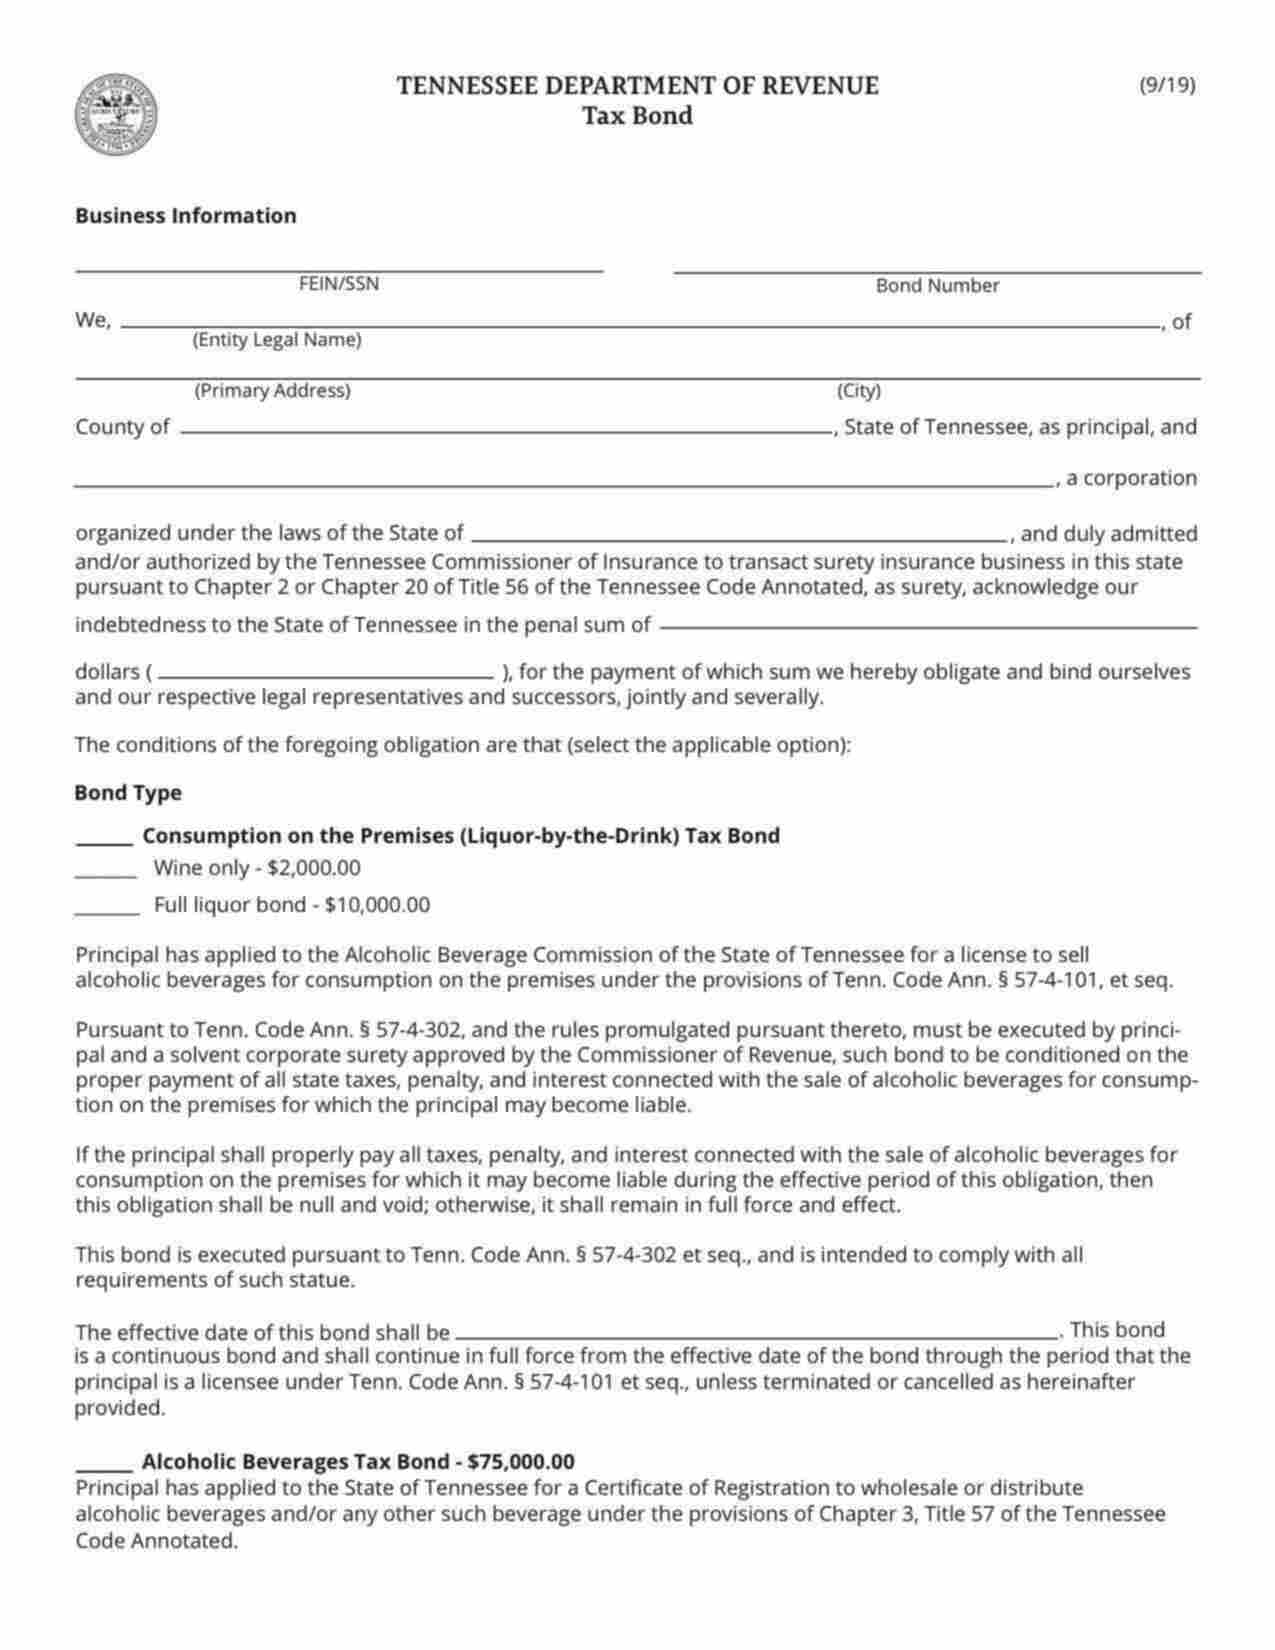 Tennessee Beer Manufacturers Tax Bond Form